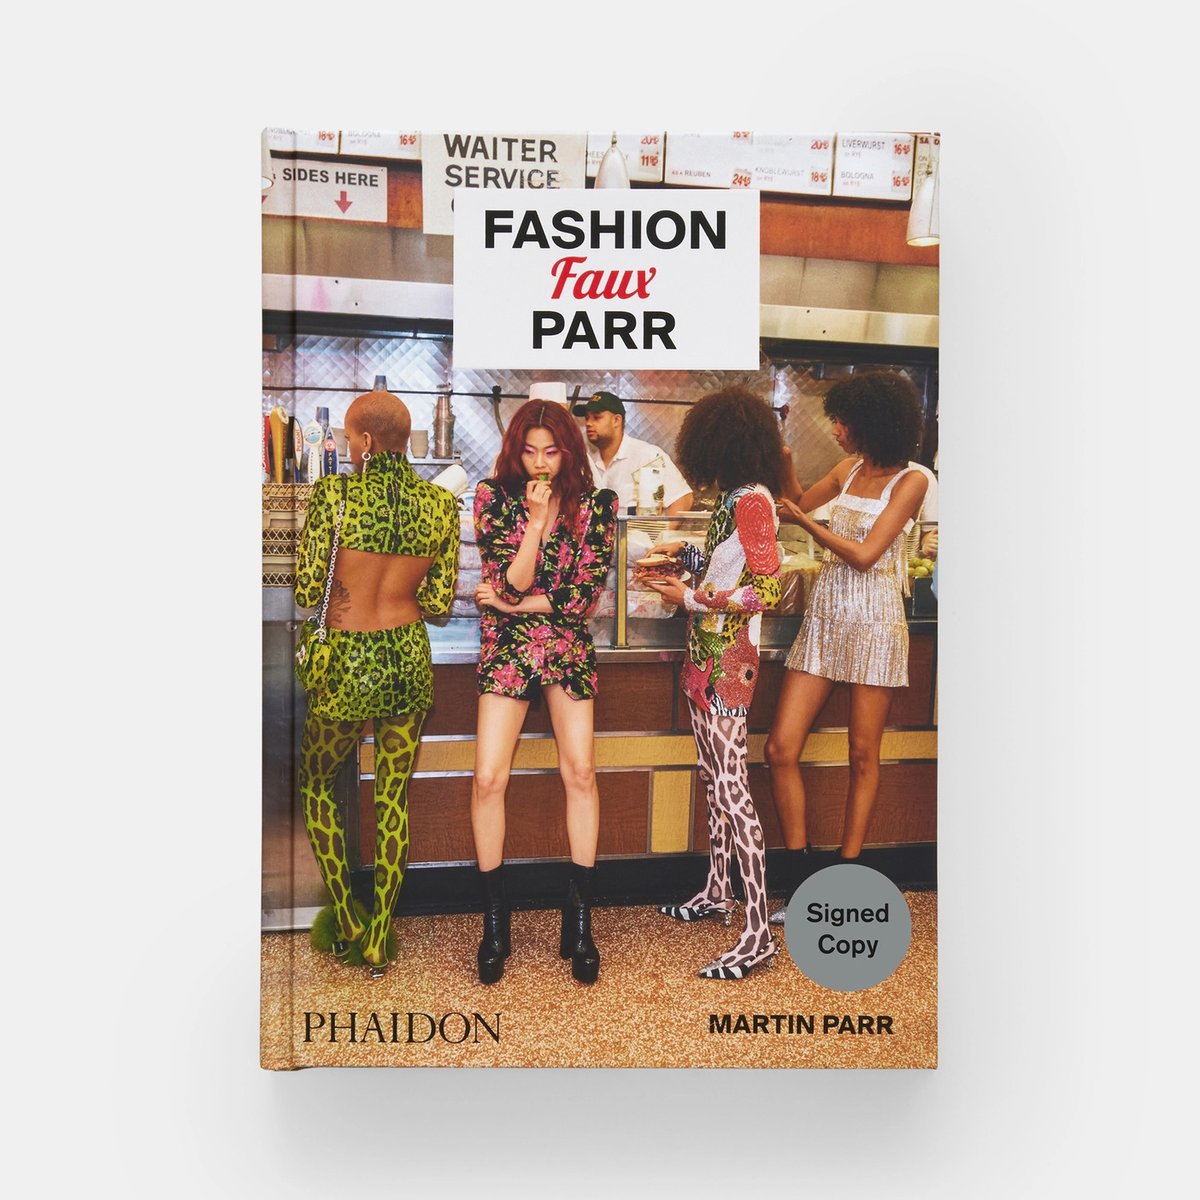 🖊️Today is the day: 'Fashion Faux Parr' by #MartinParr is out now. Limited signed copies available here: eu1.hubs.ly/H08l-vL0